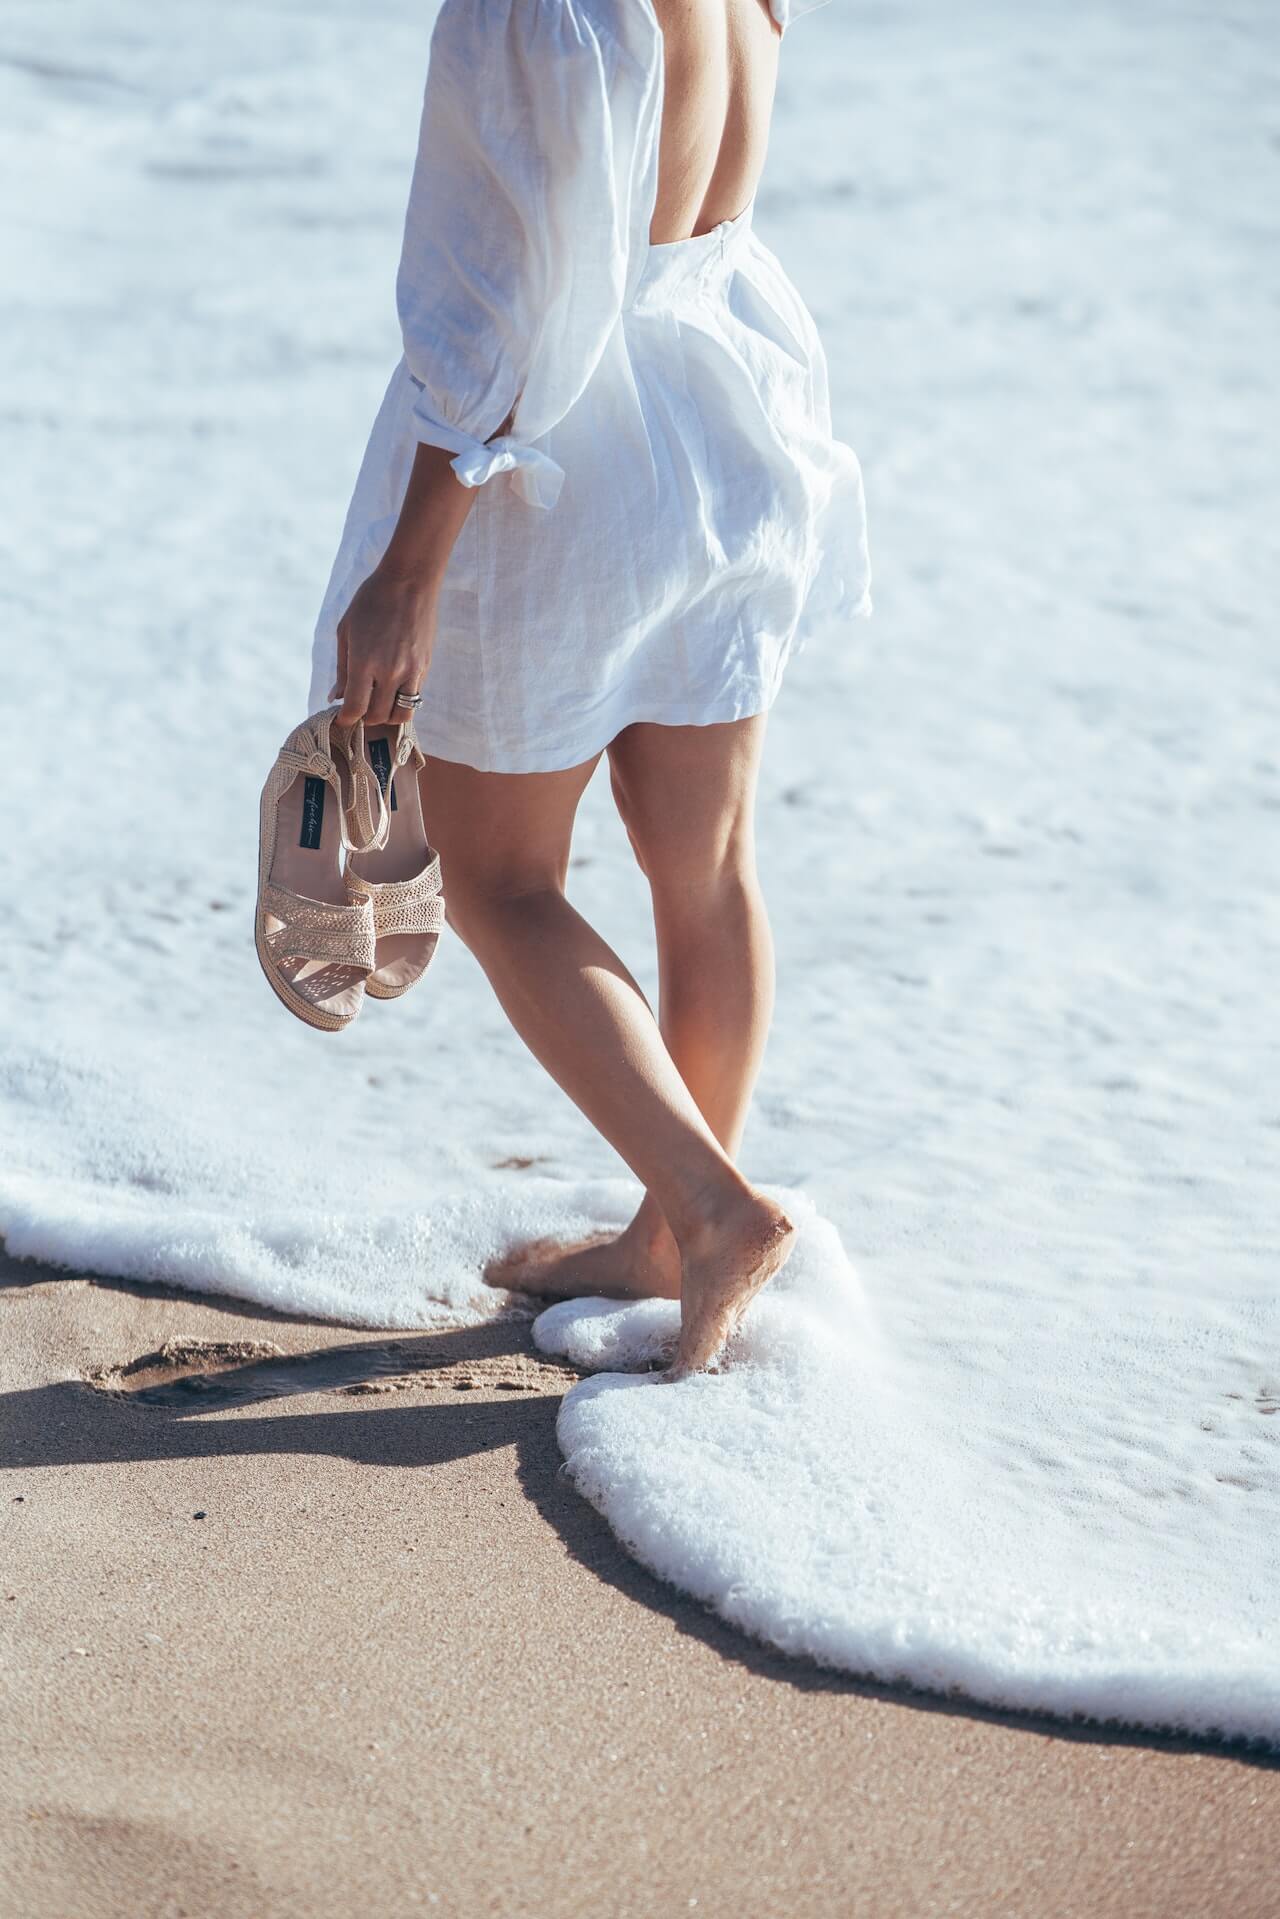 holding sandals in hand while walking along the shore